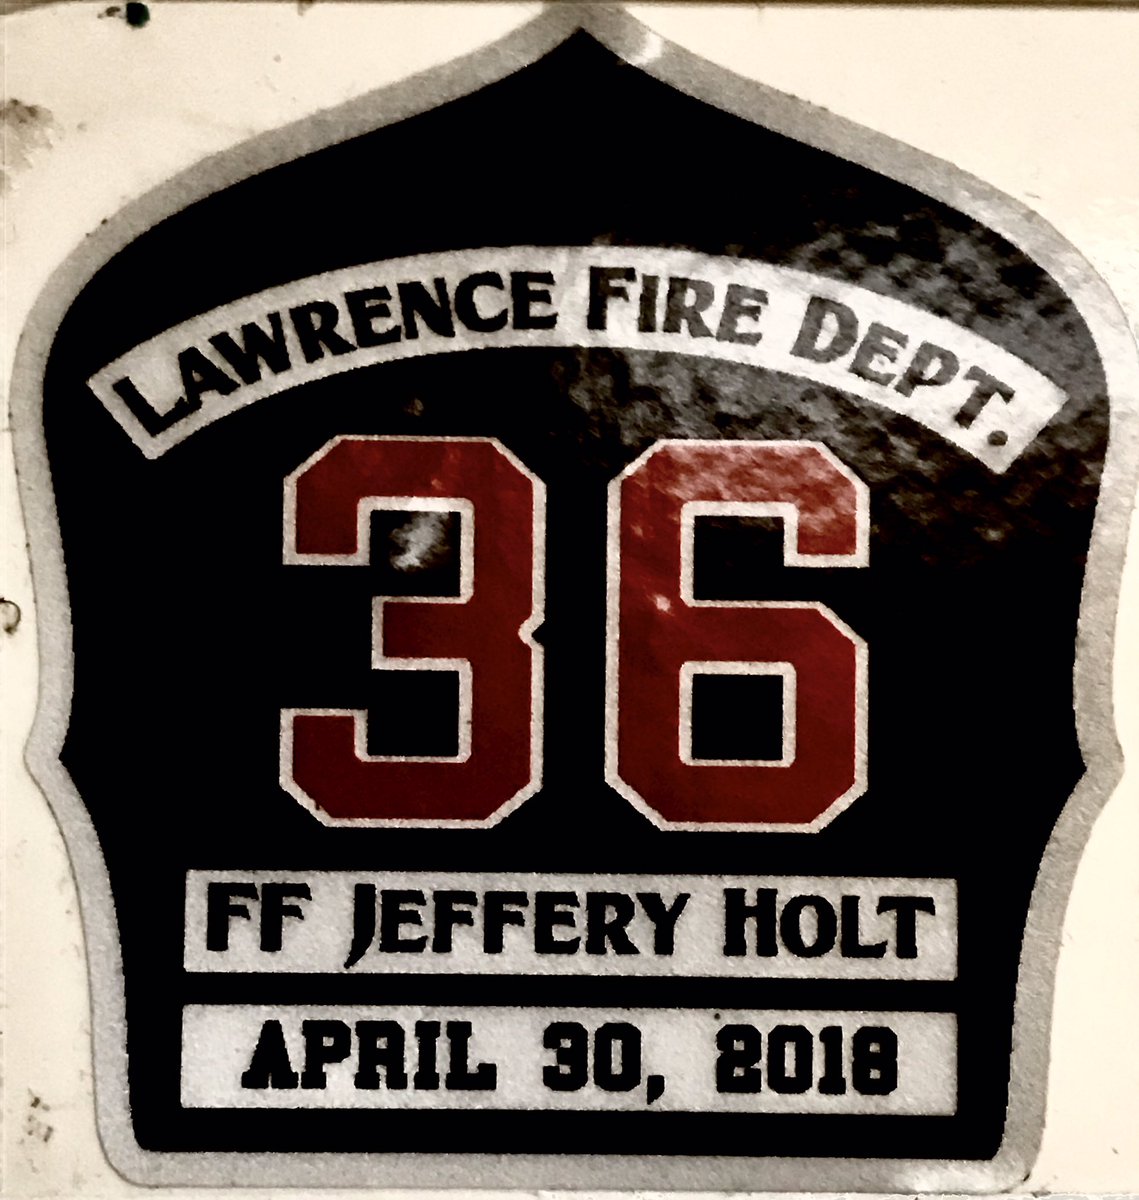 Lawrence_FD tweet picture